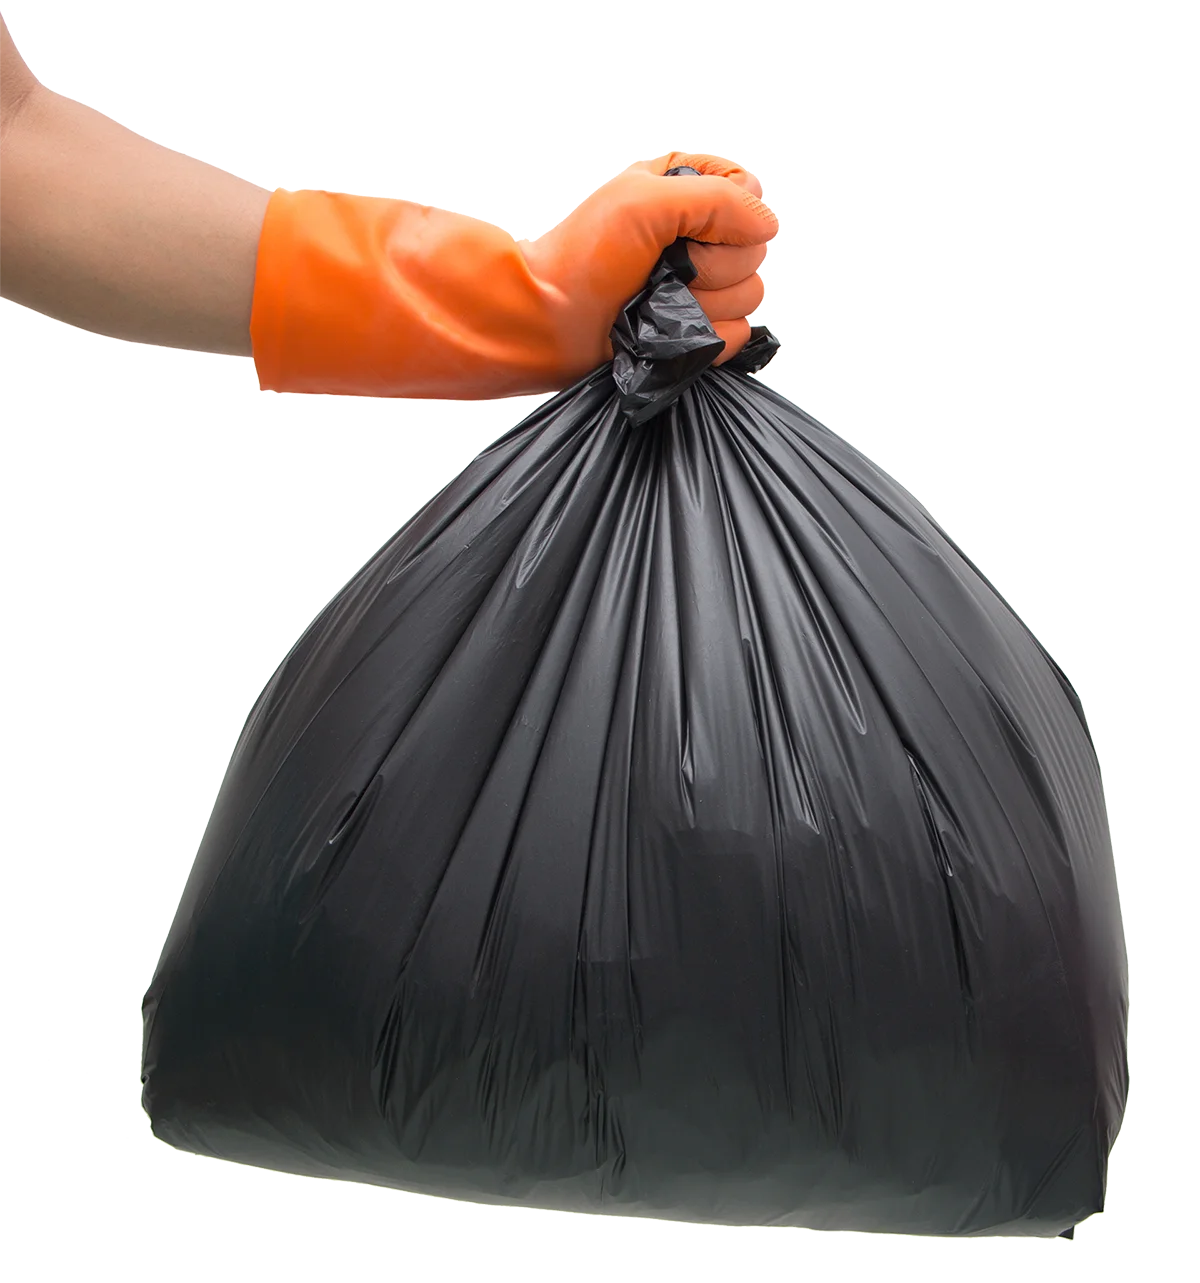 RWS is the doorstep trash company near you that you can count on for expert apartment trash services.